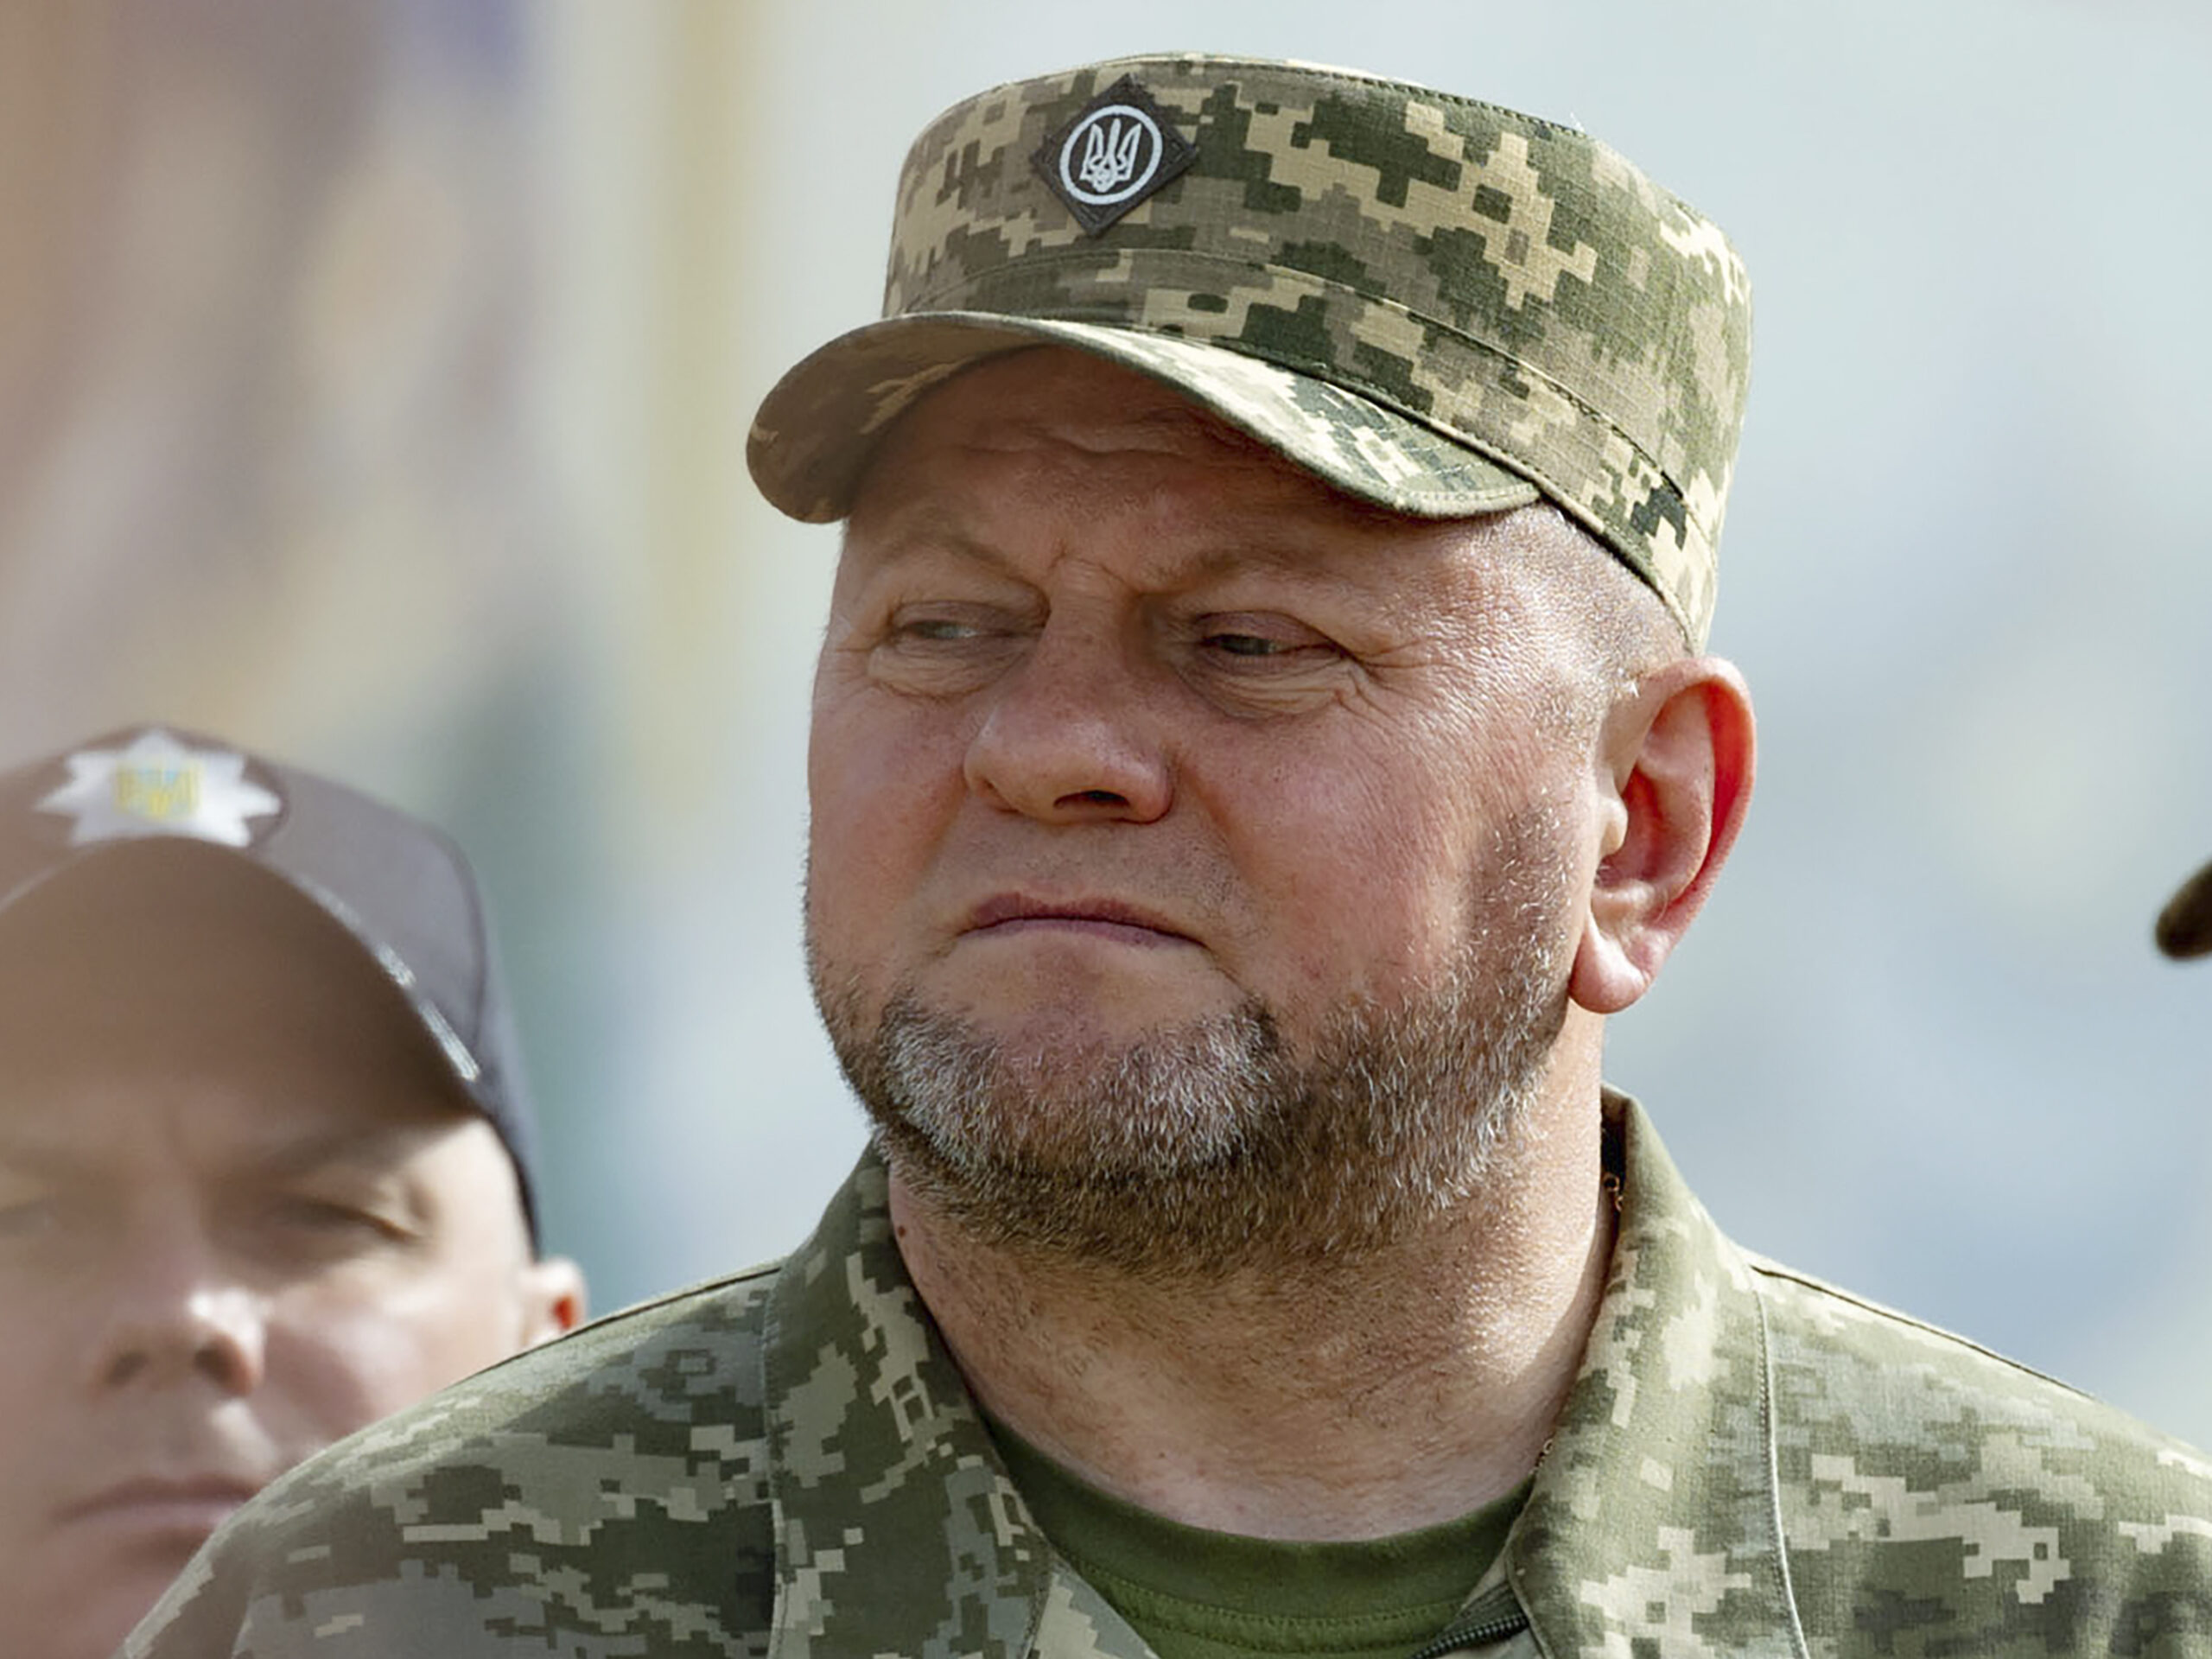 Ukraine’s Zelenskyy replaces the army’s leader almost 2 years into war with Russia